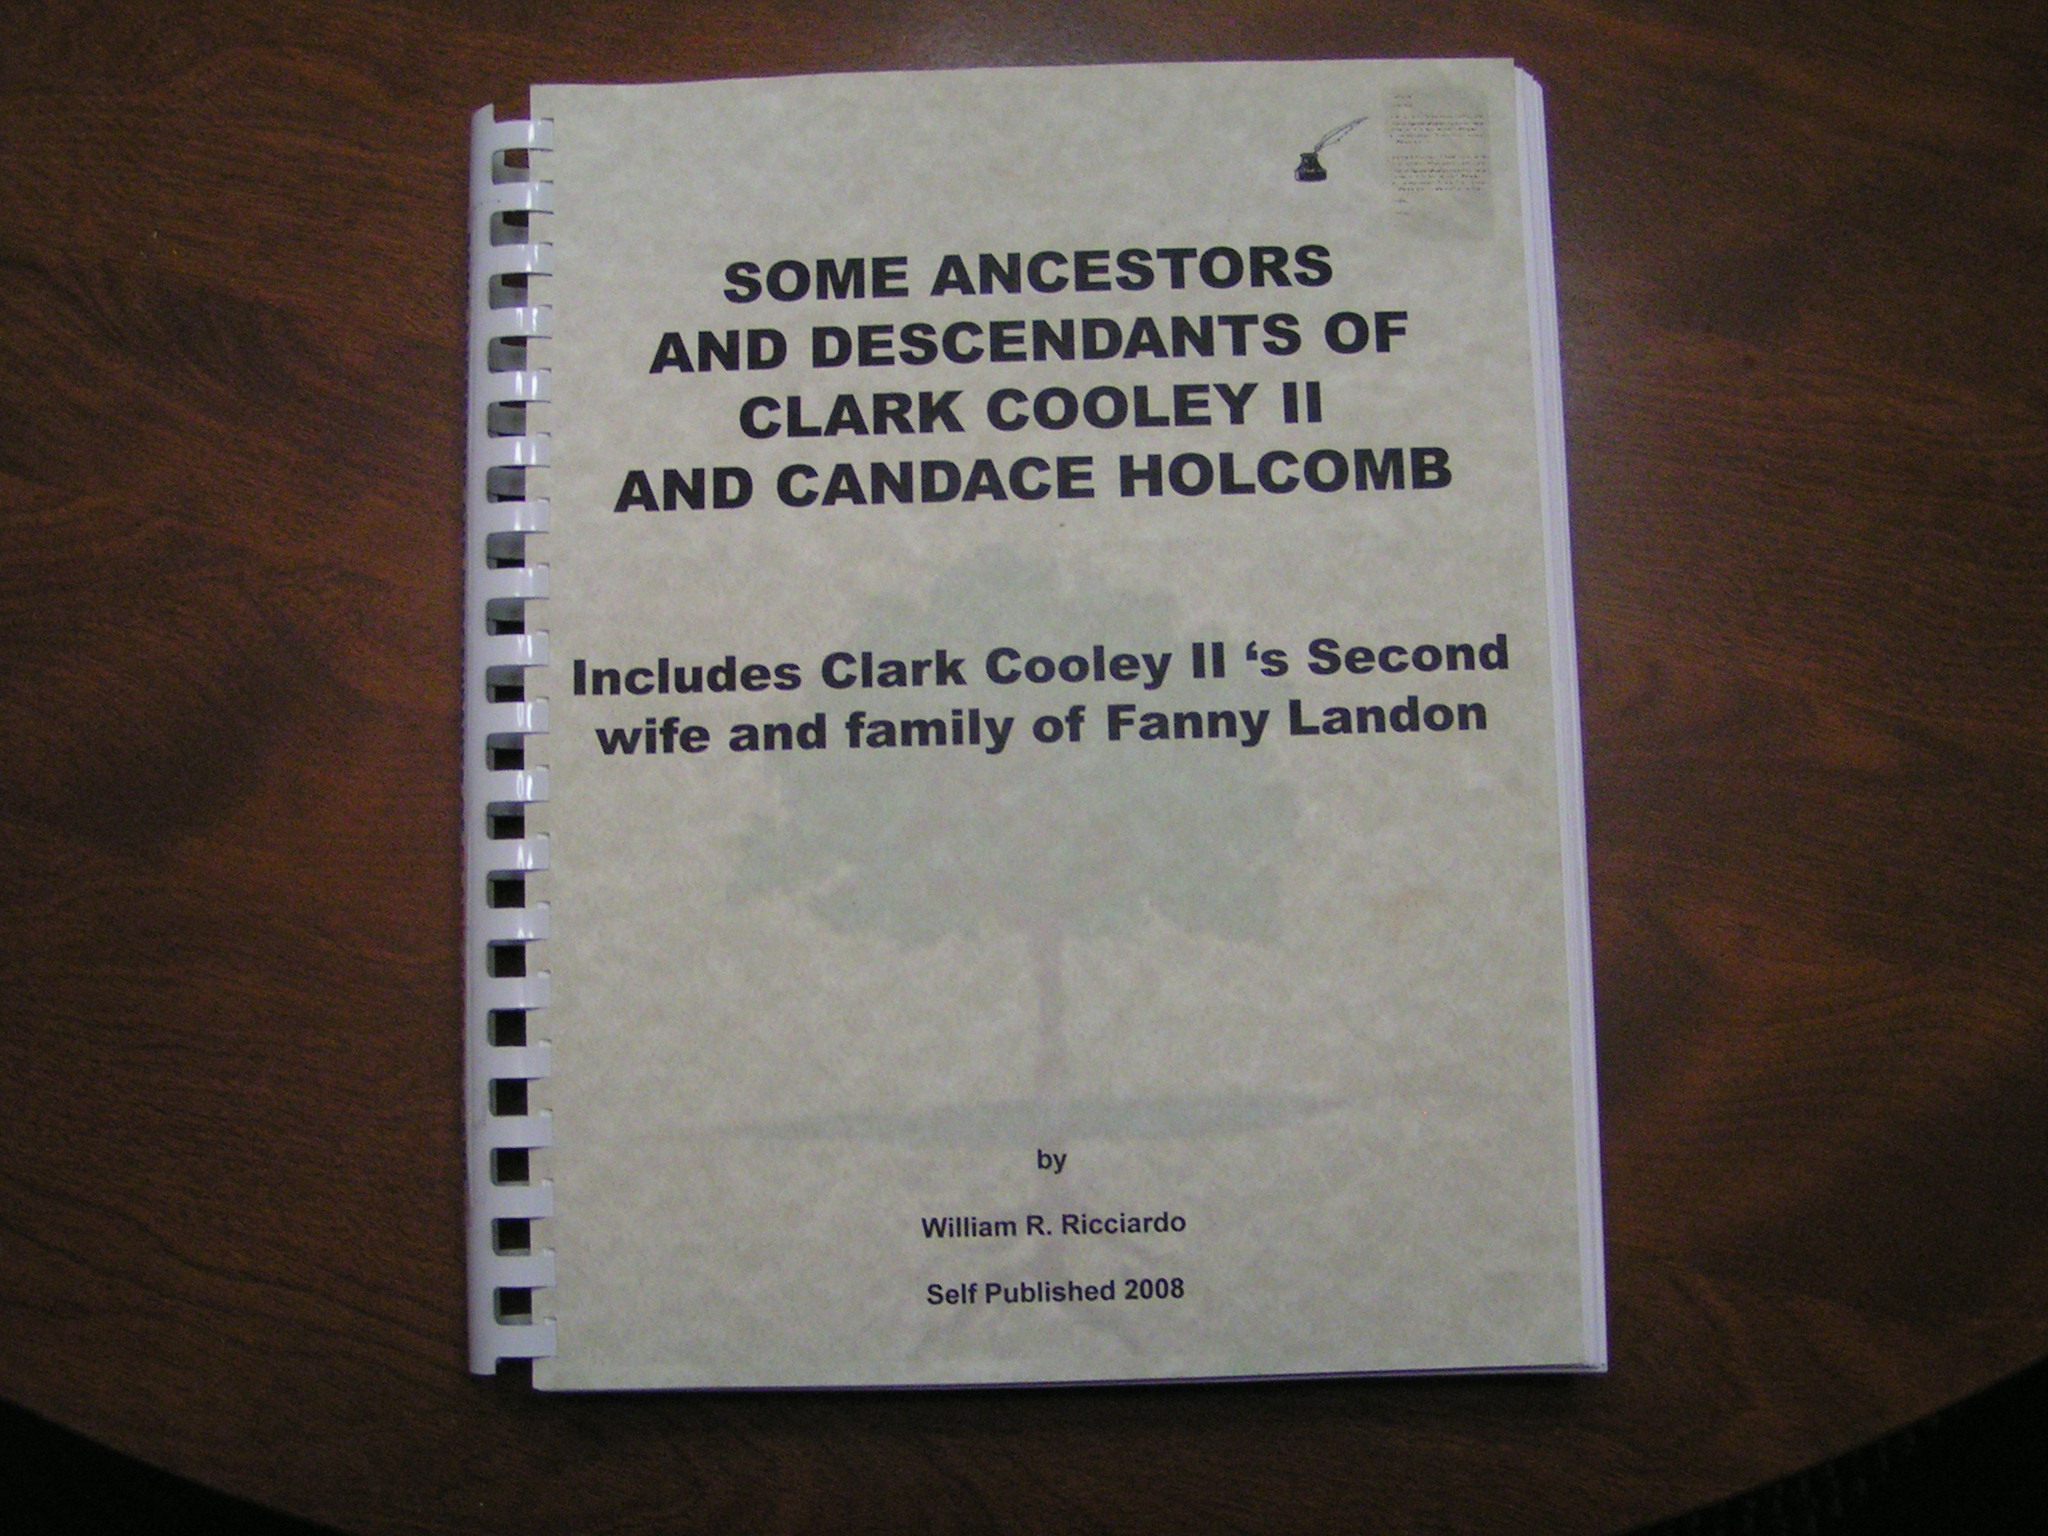 "SOME DESCENDANTS AND ANCESTORS OF CLARK COOLEY II AND CANDACE HOLCOMB"